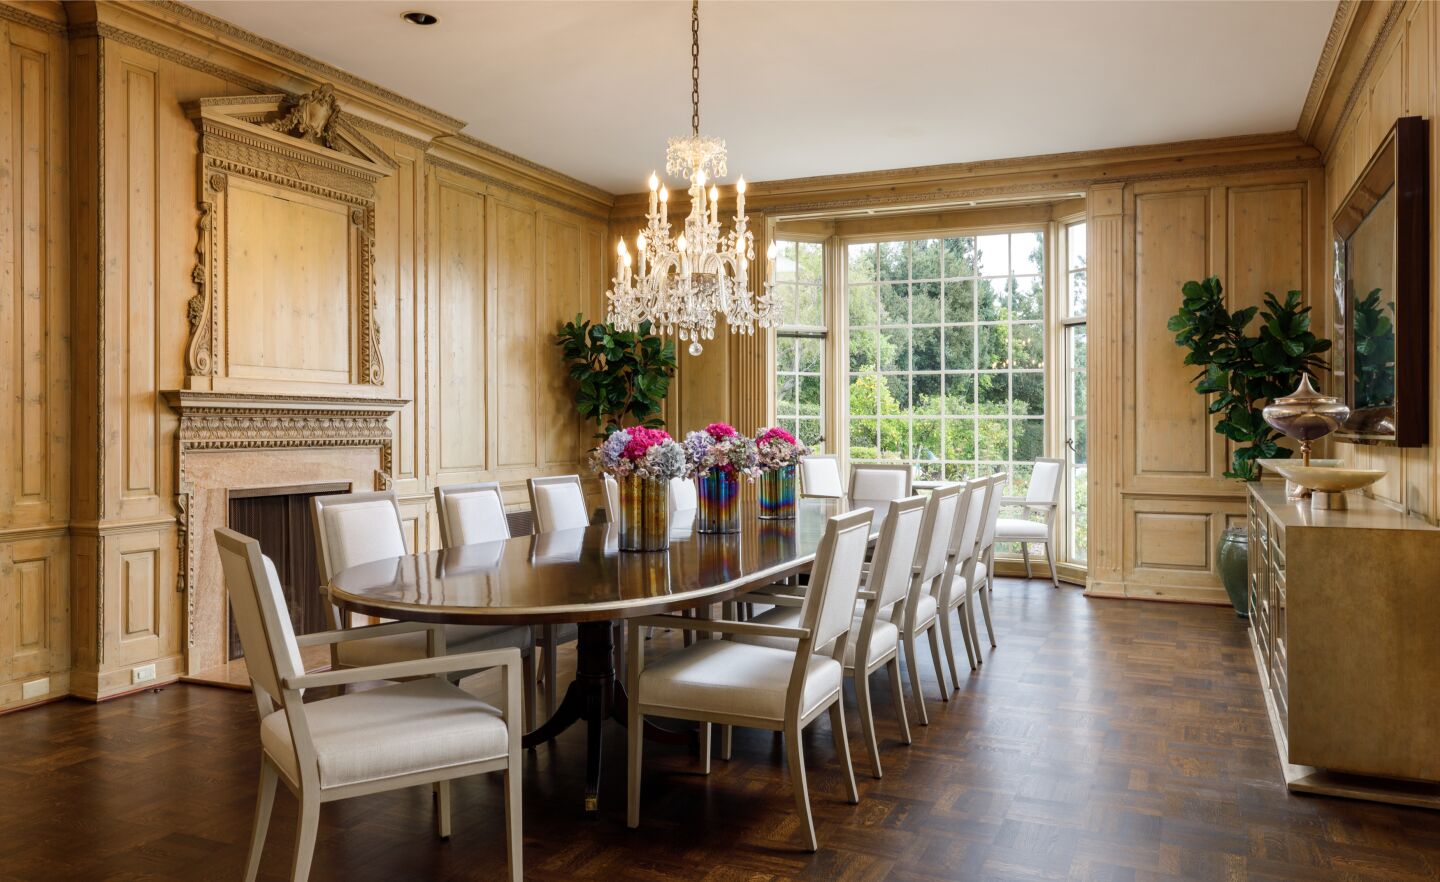 The formal dining room.